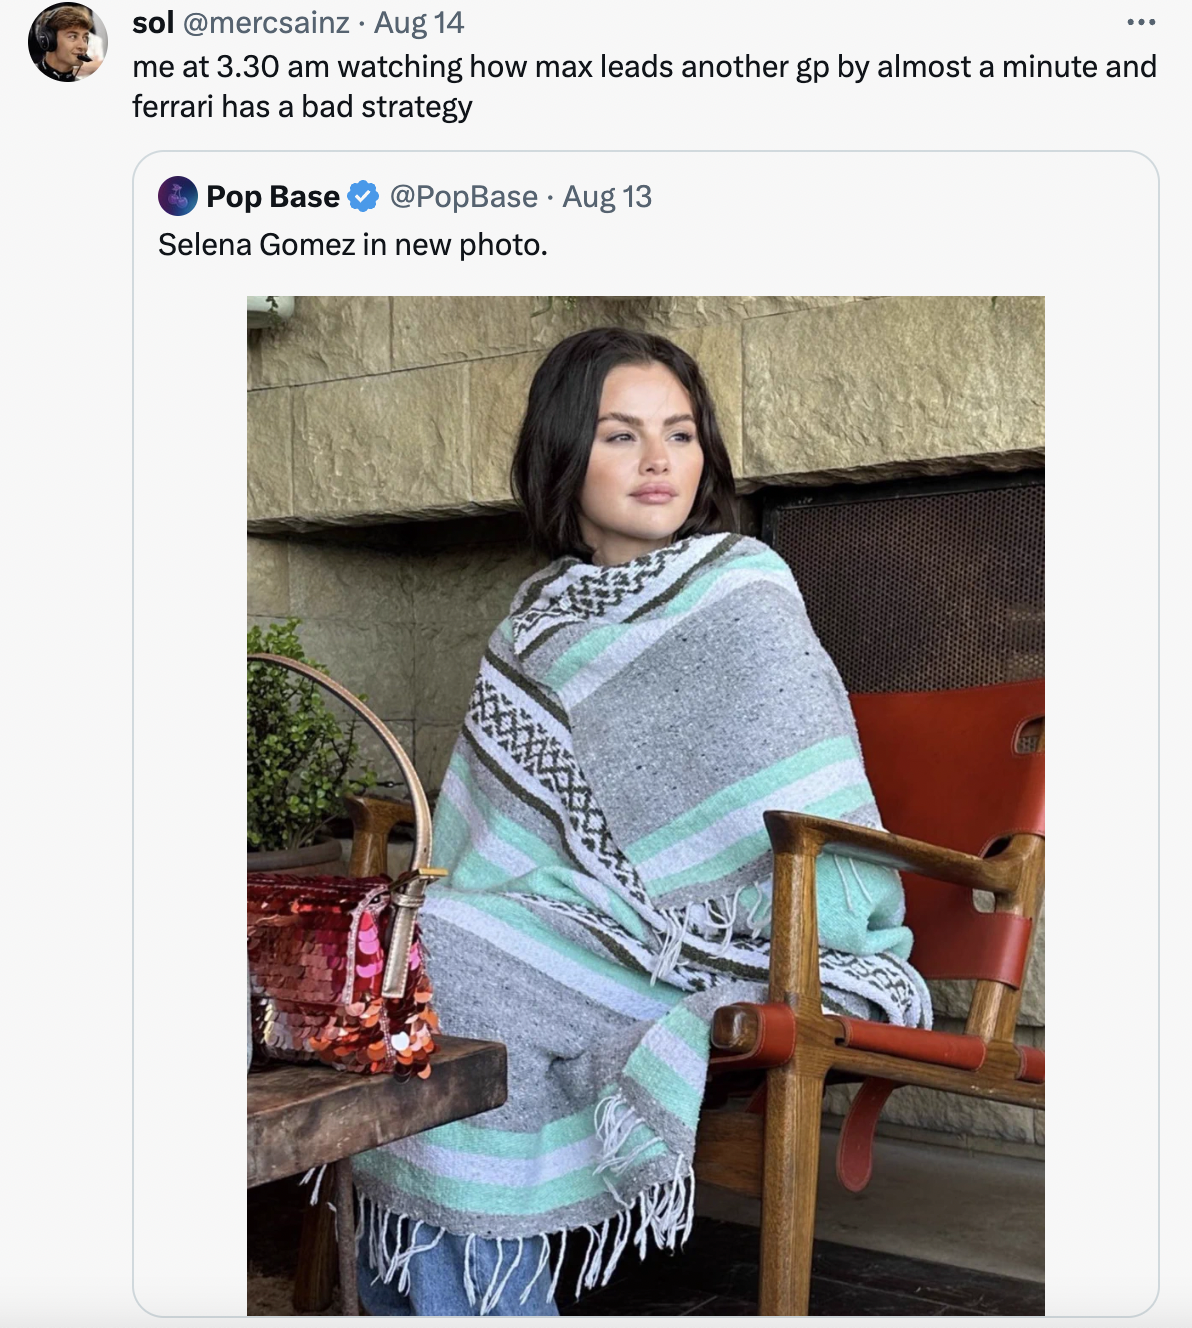 selena gomez in a blanket - stole - sol . Aug 14 me at 3.30 am watching how max leads another gp by almost a minute and ferrari has a bad strategy Pop Base Aug 13 Selena Gomez in new photo. 2744 Ven